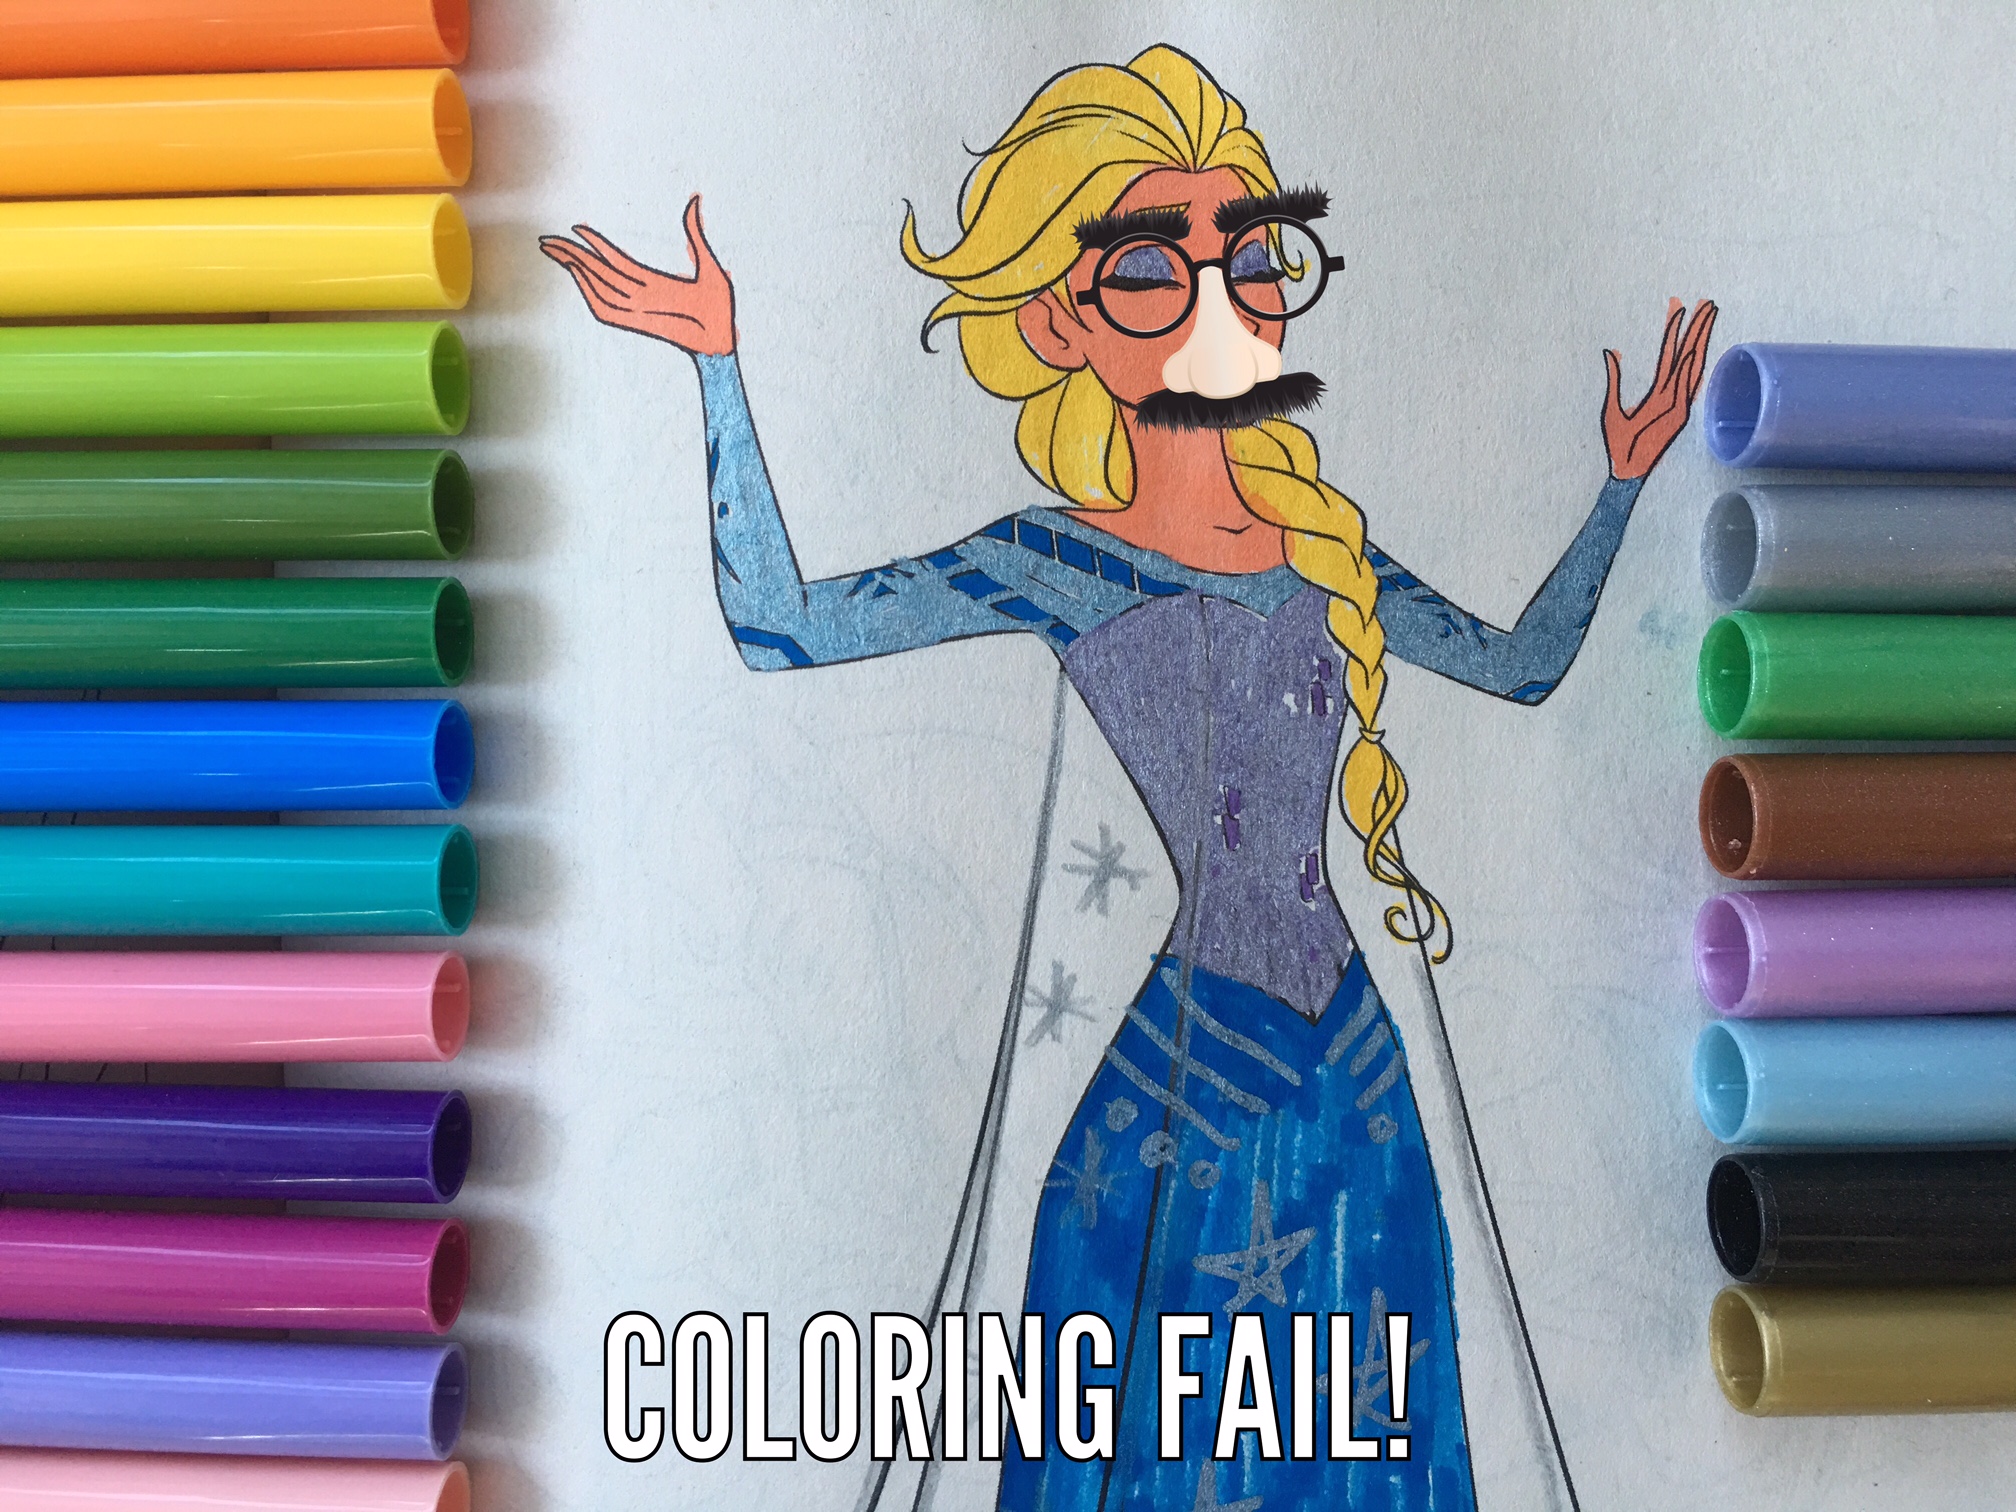 Coloring Fail! Elsa from Disney’s Frozen with Crayola Markers – Monkey